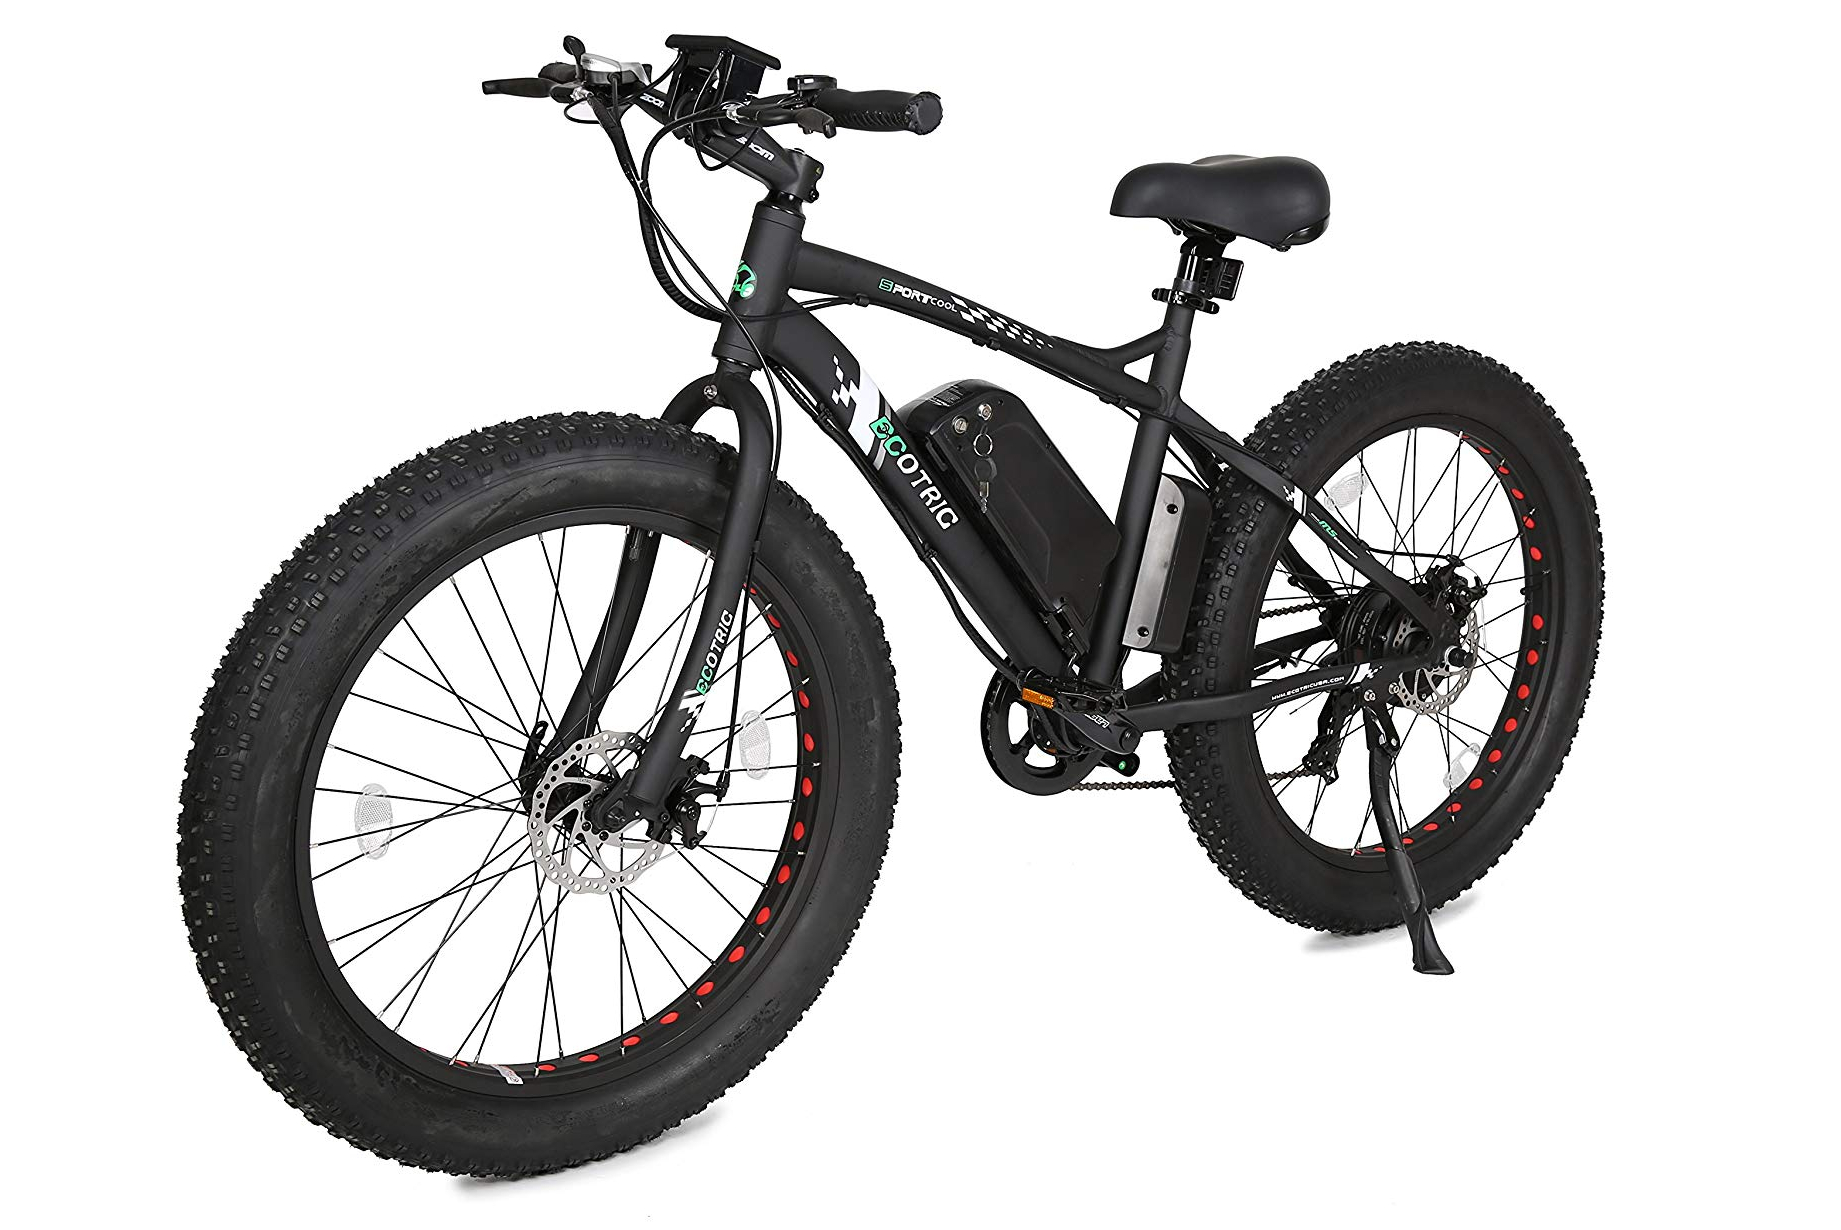 rei amazon and walmart drop prices for <entity>electric bikes</entity> labor day ecotric fat tire bike 16  1